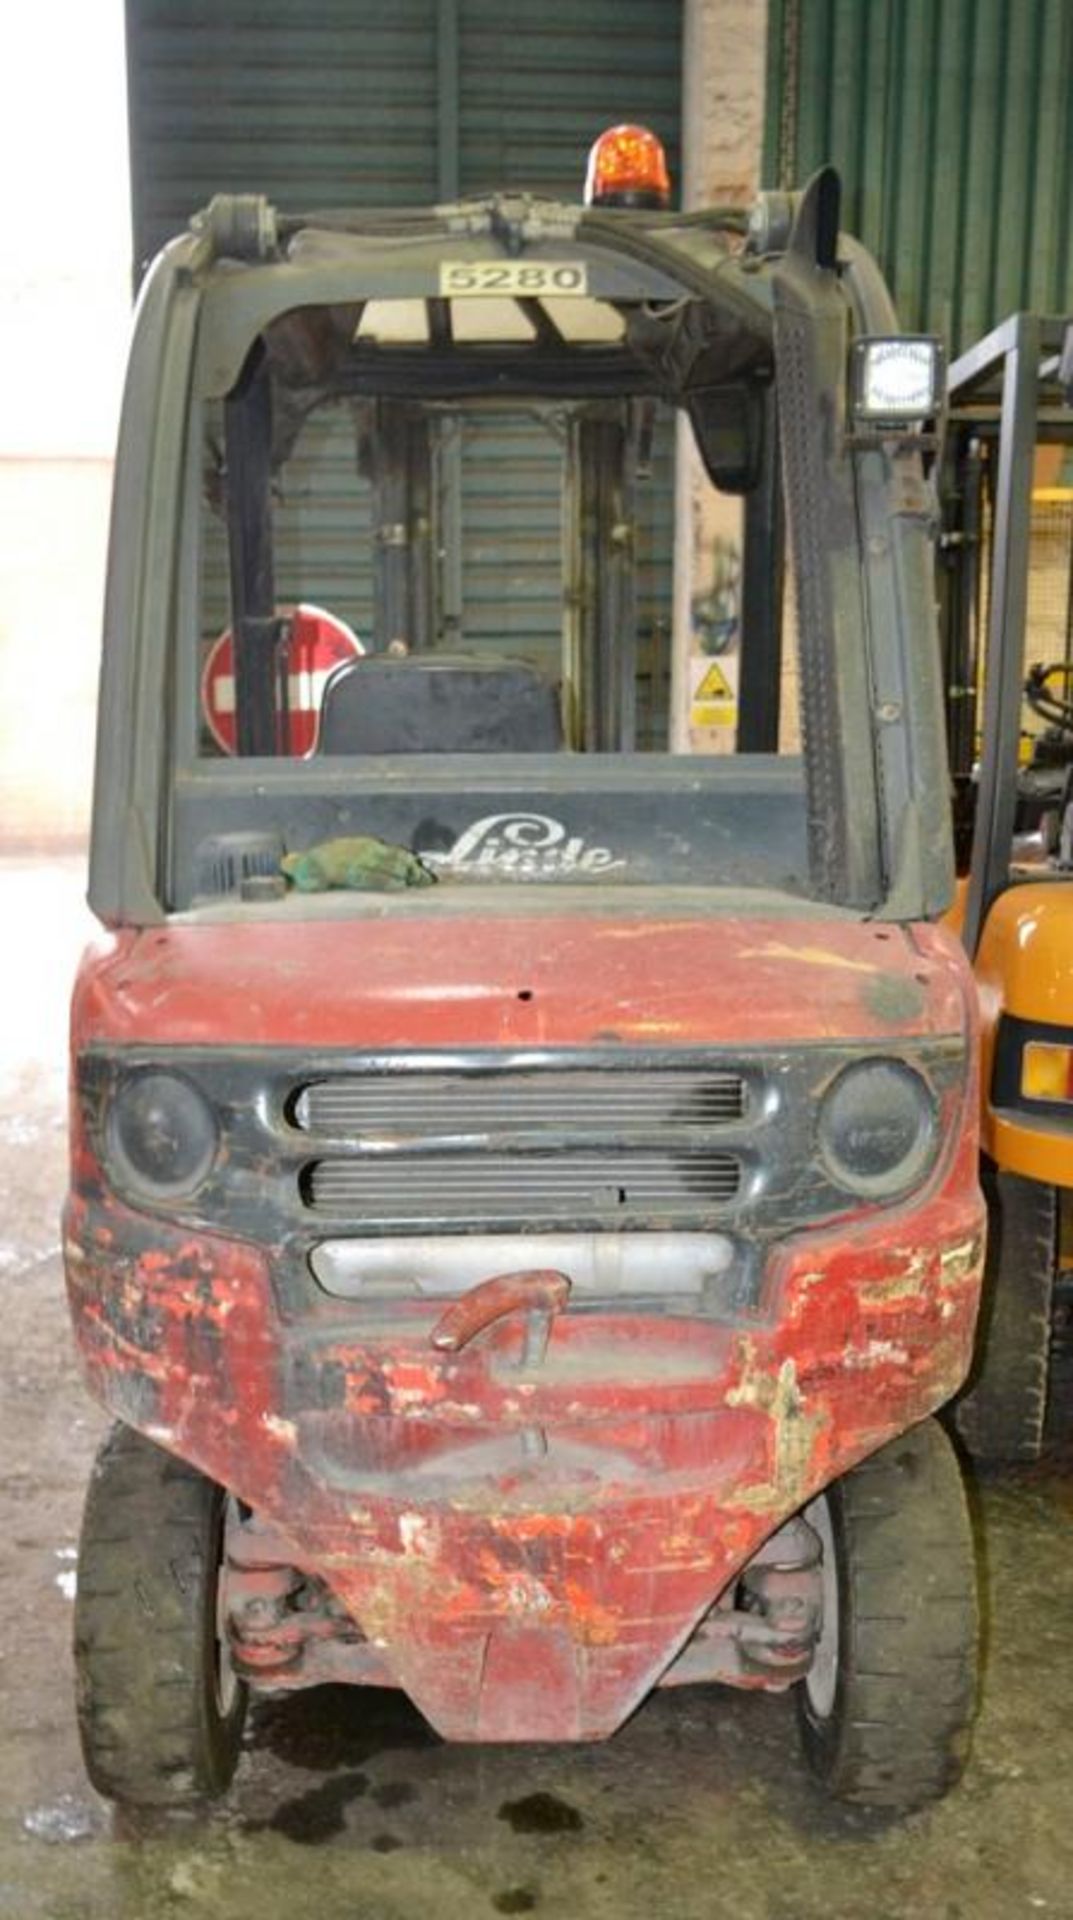 1 x 2003 Lansing Linde H25D Forklift - CL464 - Location: Liverpool L19 - Used In Working Condition - Image 17 of 30